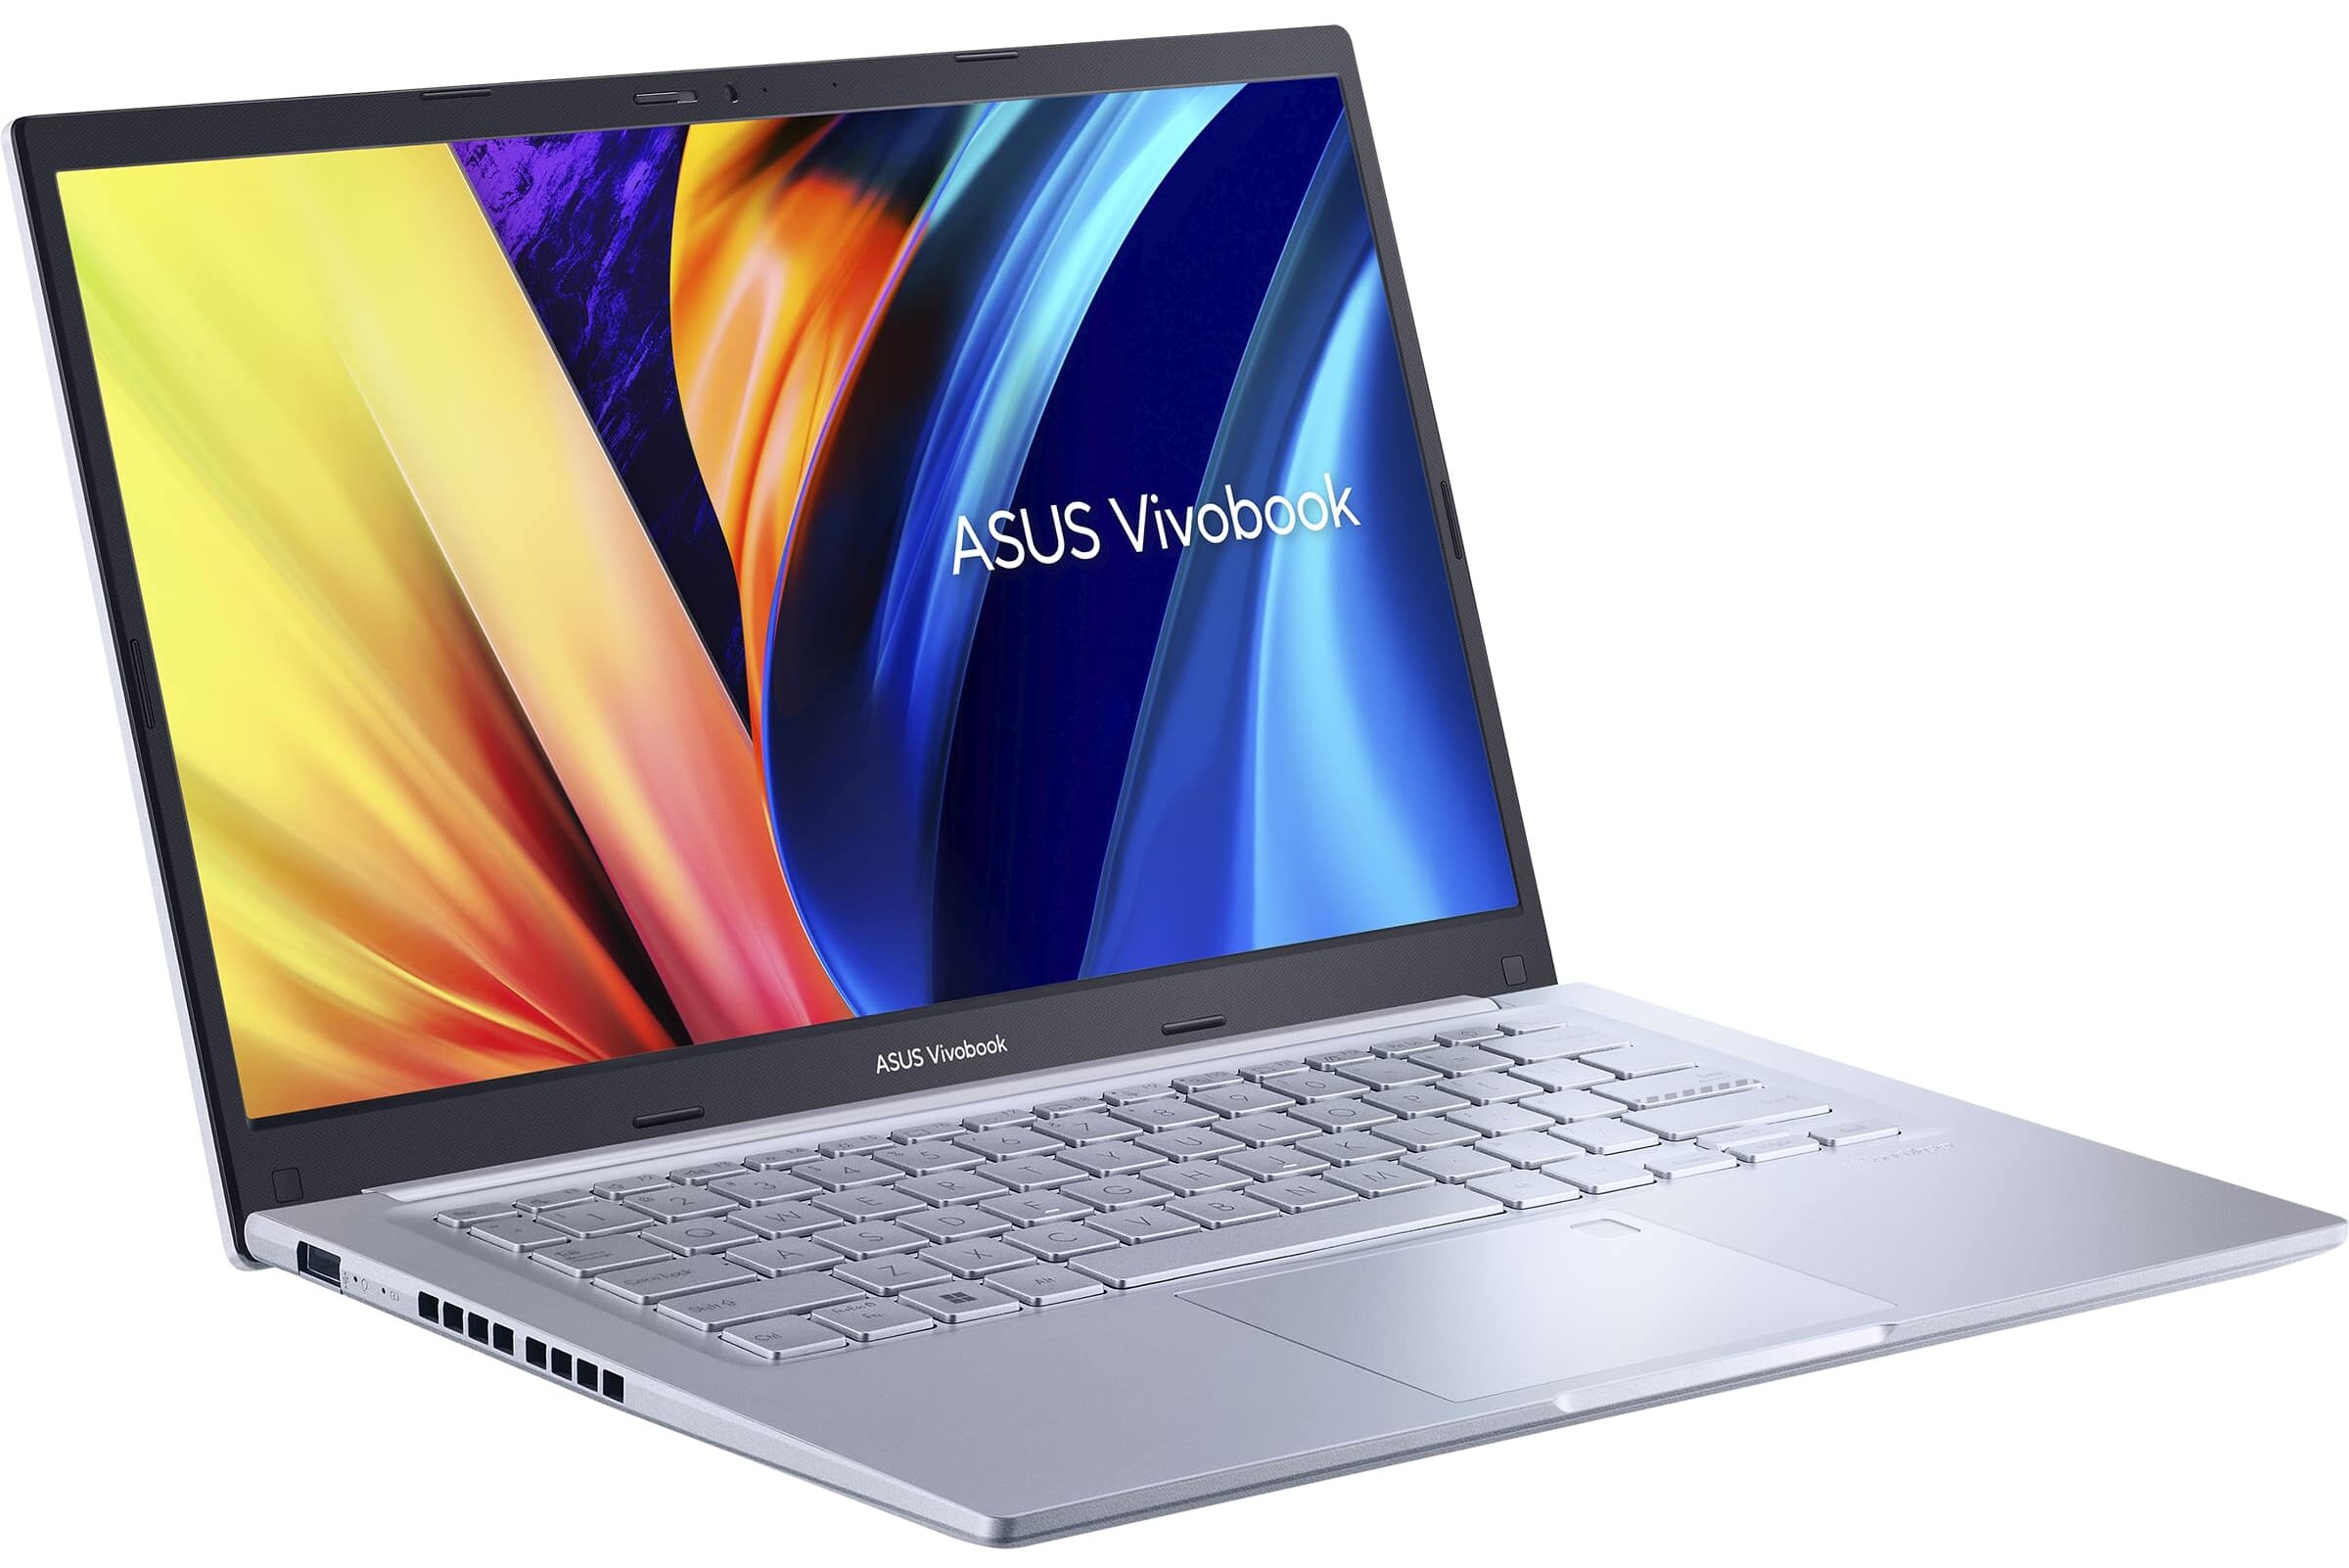 ASUS Vivobook 14 (X1402 / M1402 / D1402 / F1402) - Specs, Tests, and Prices